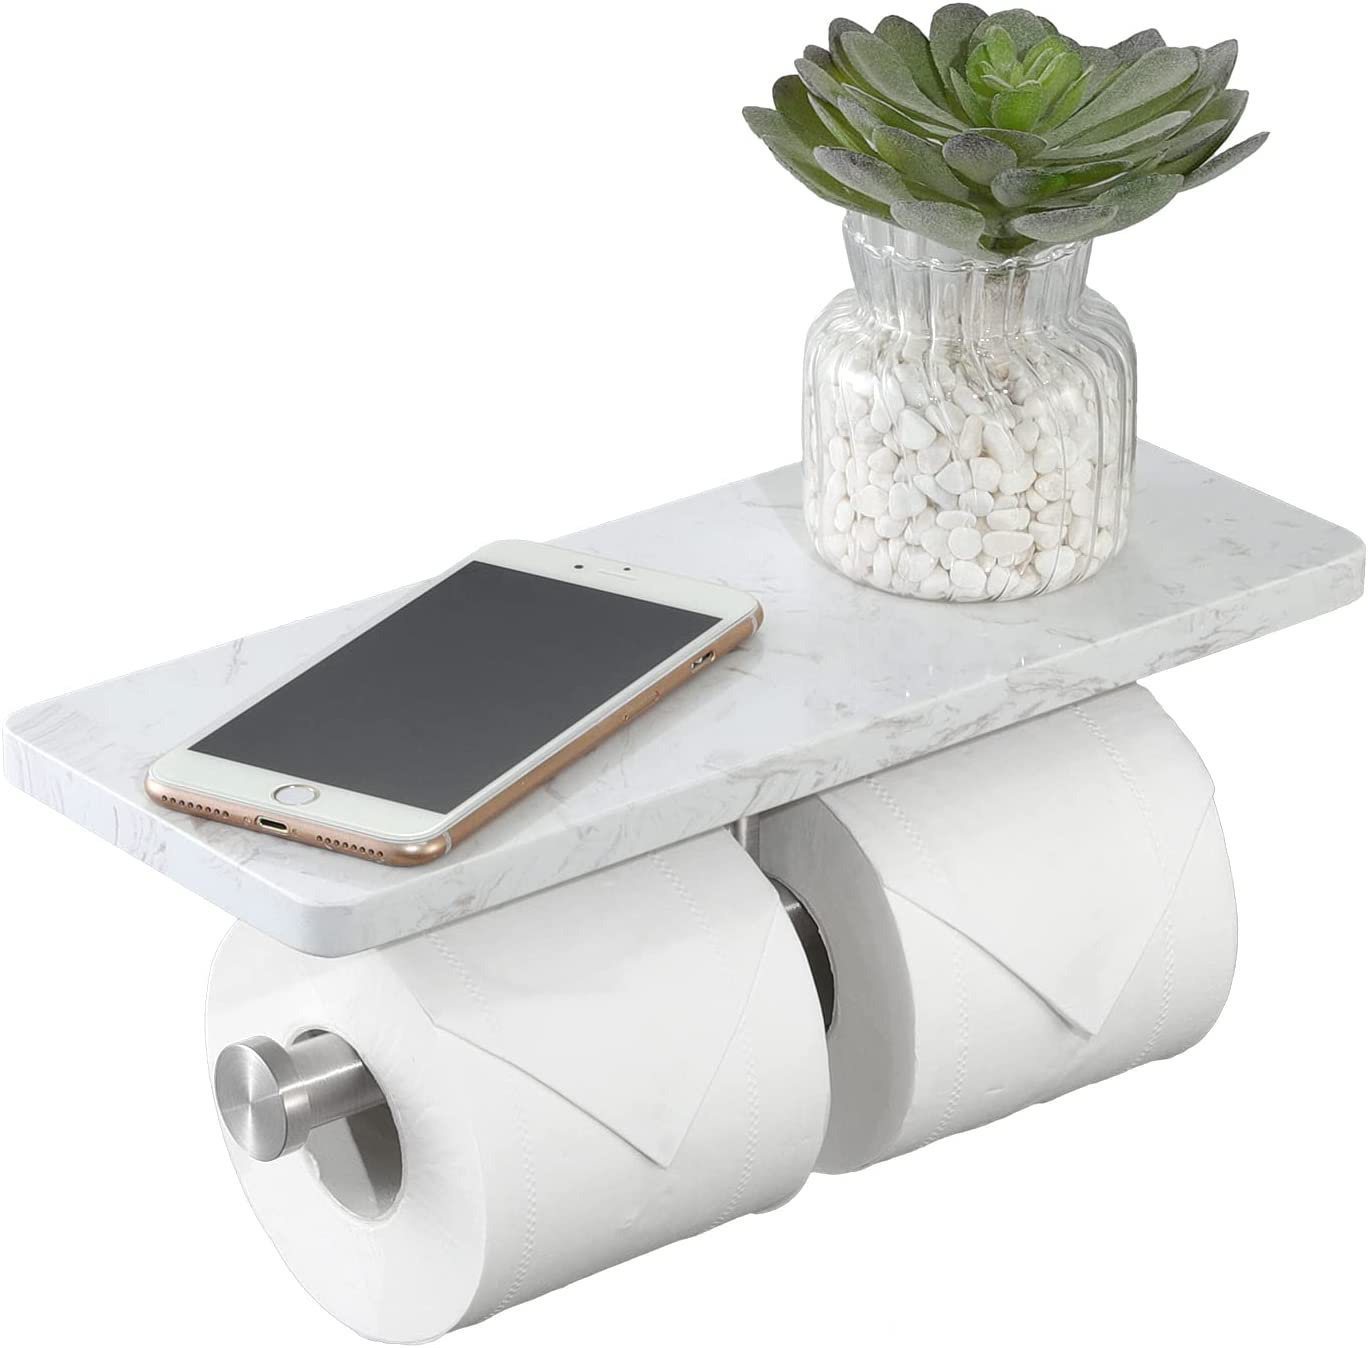 Luxdecor Metal Toilet Paper Holder with Shelf Wall Mount